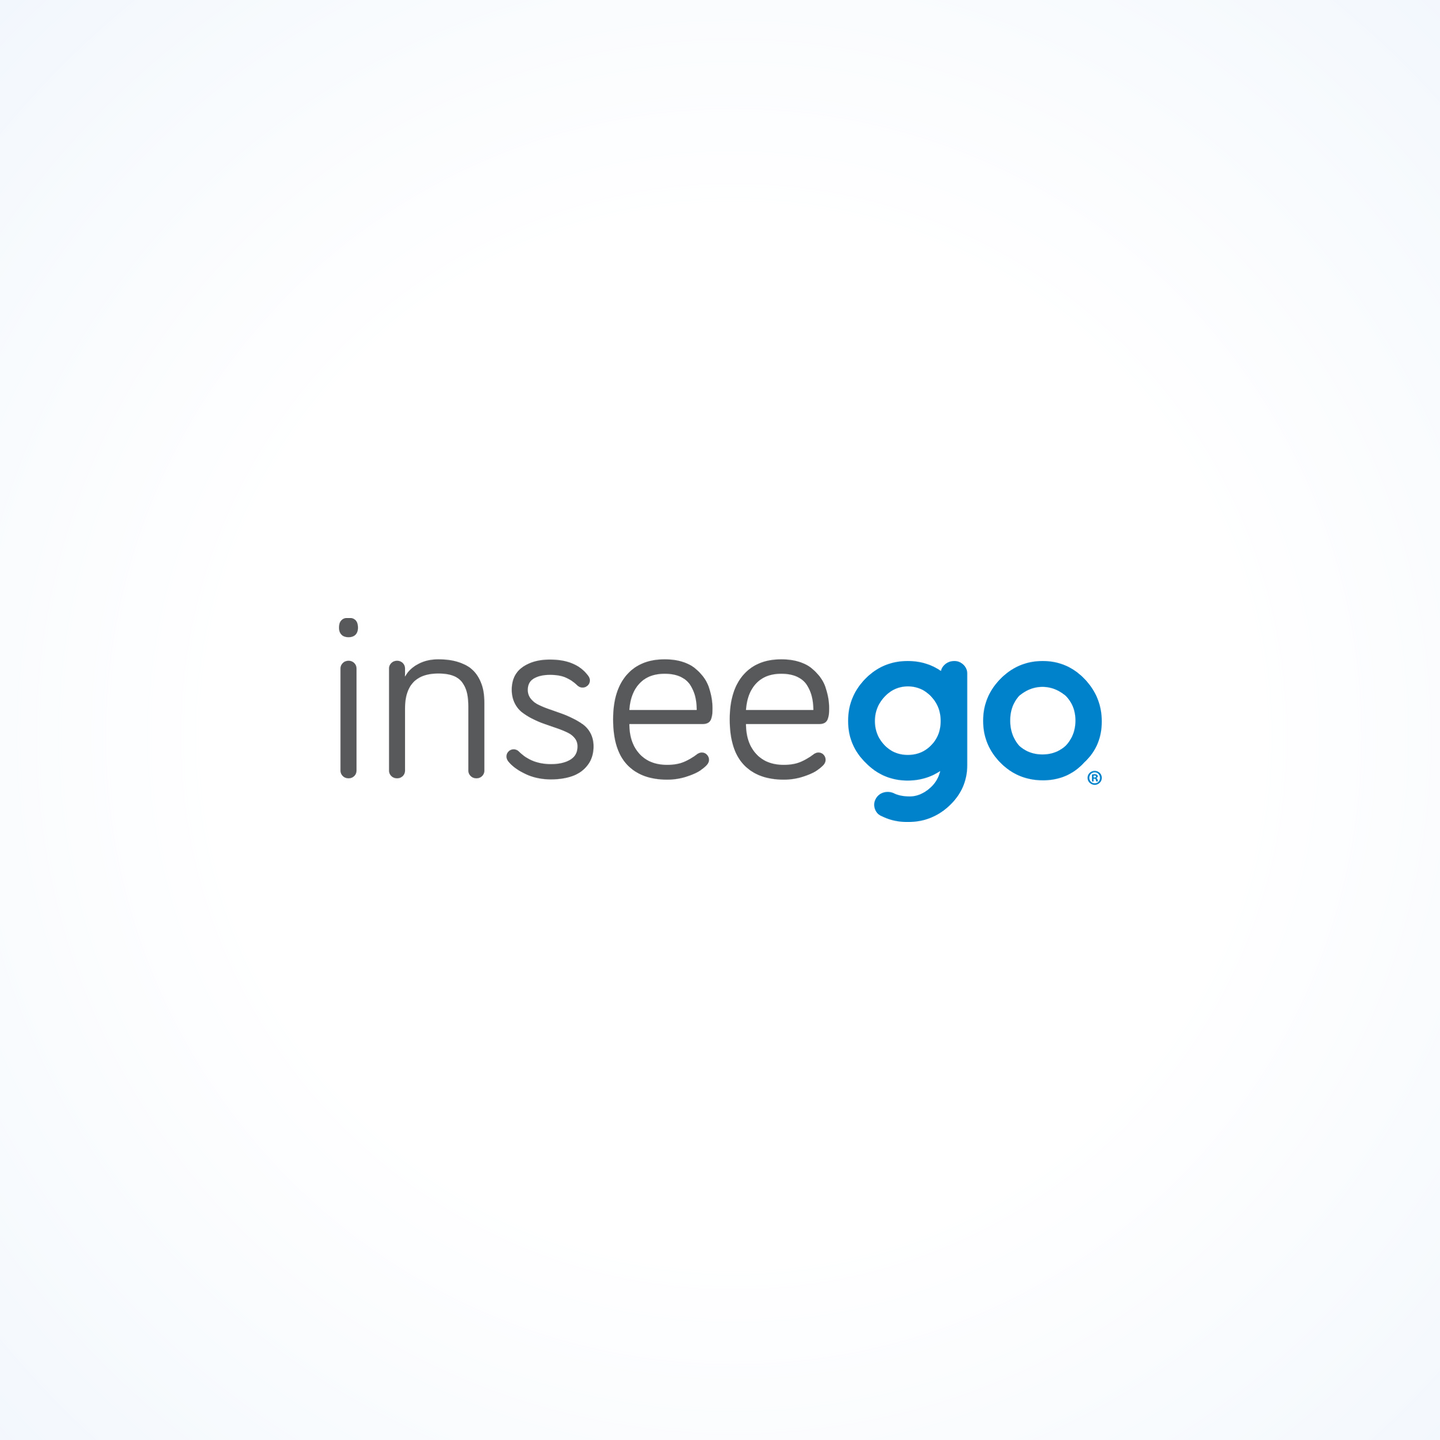 Three-year extended warranty service for the Inseego FW2000e device.